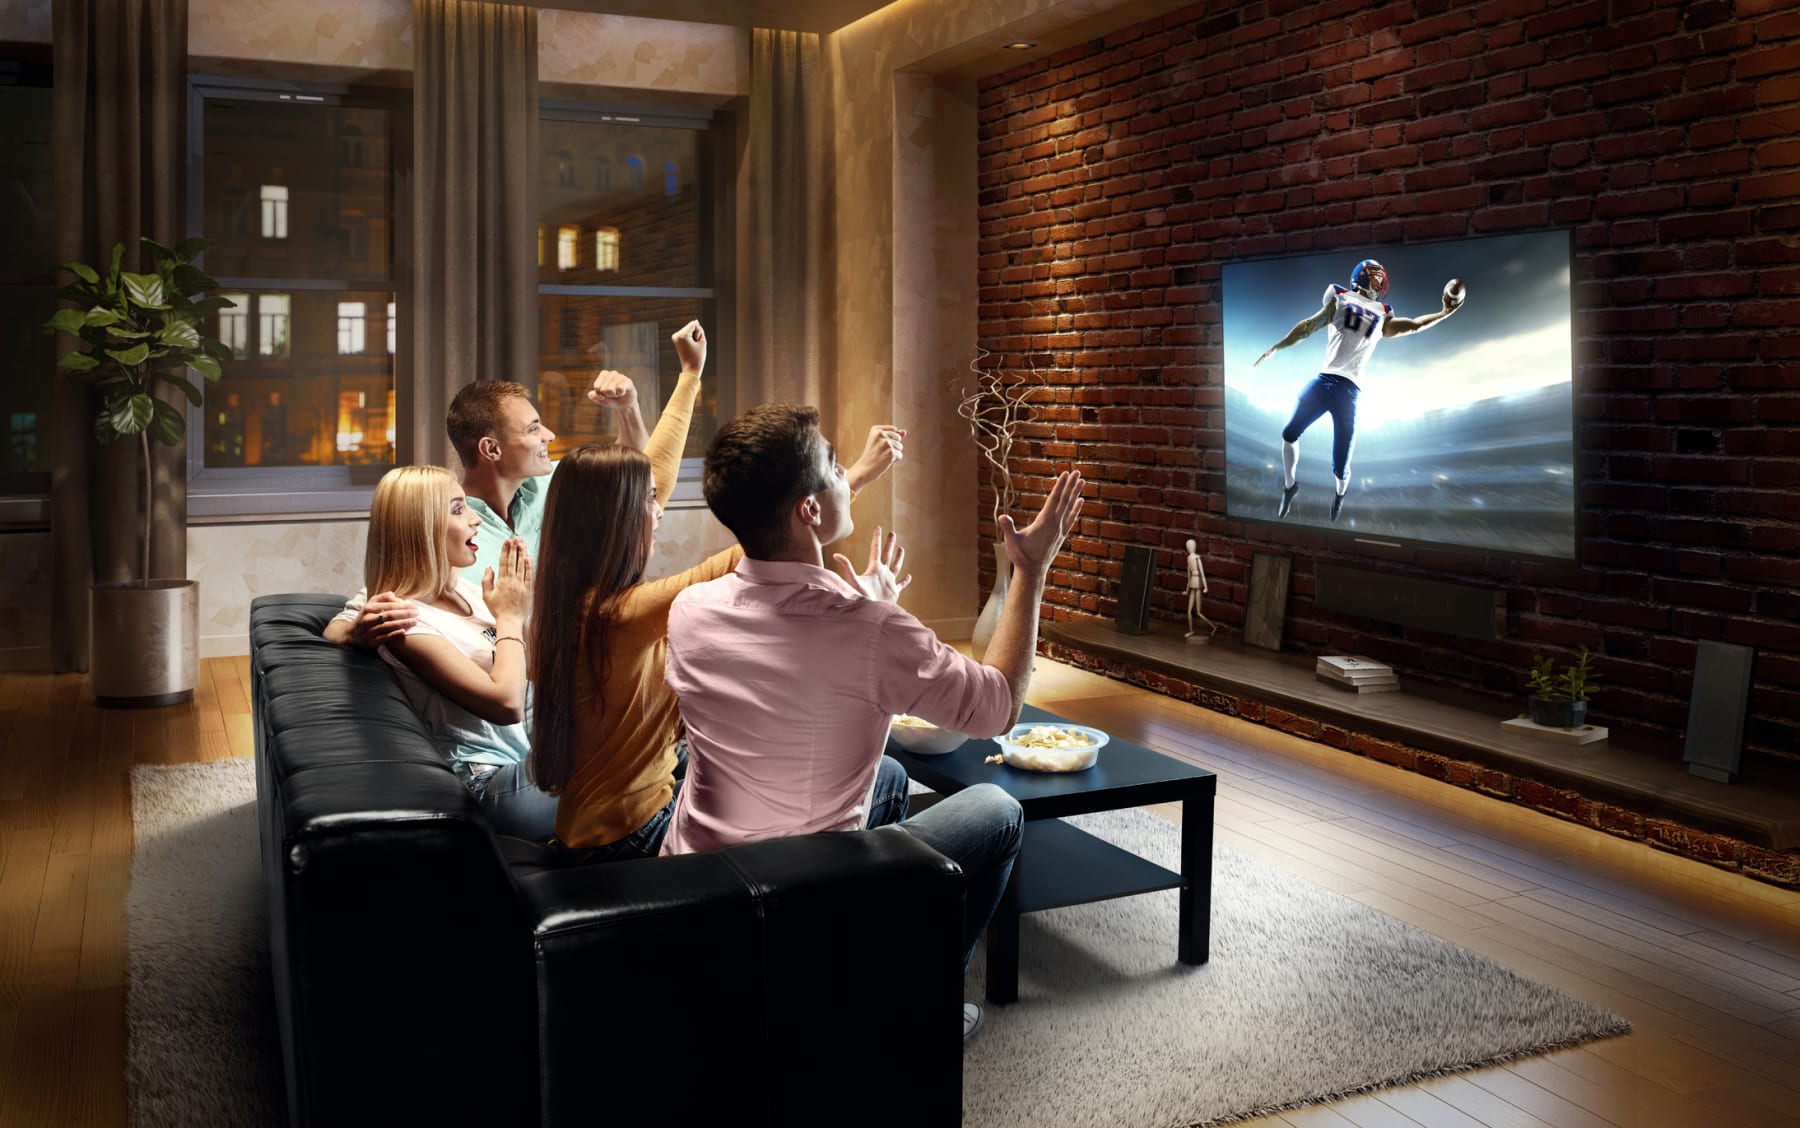 Couples cheer while watching football on TV.